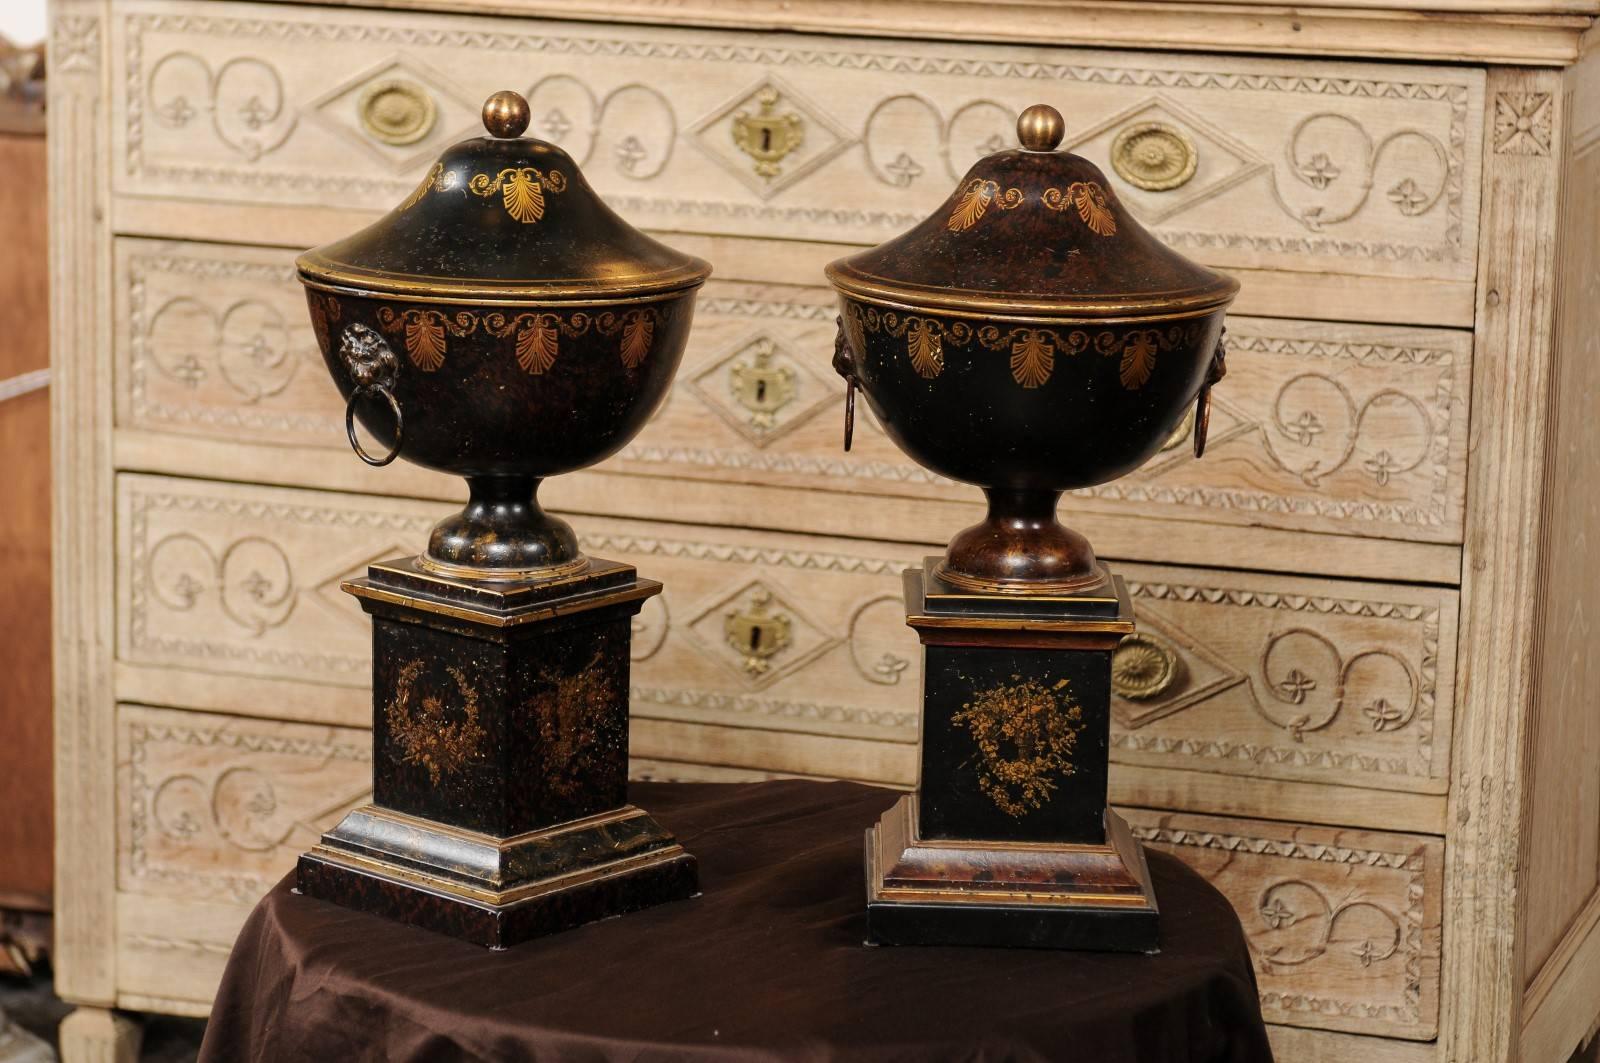 This pair of French tole urns from the early 20th century is made of black circular vessels decorated with gilded palmettes and topped with black and brown mottled lids. Each urn is adorned with ring pulls on the side secured on gilt metal lion back